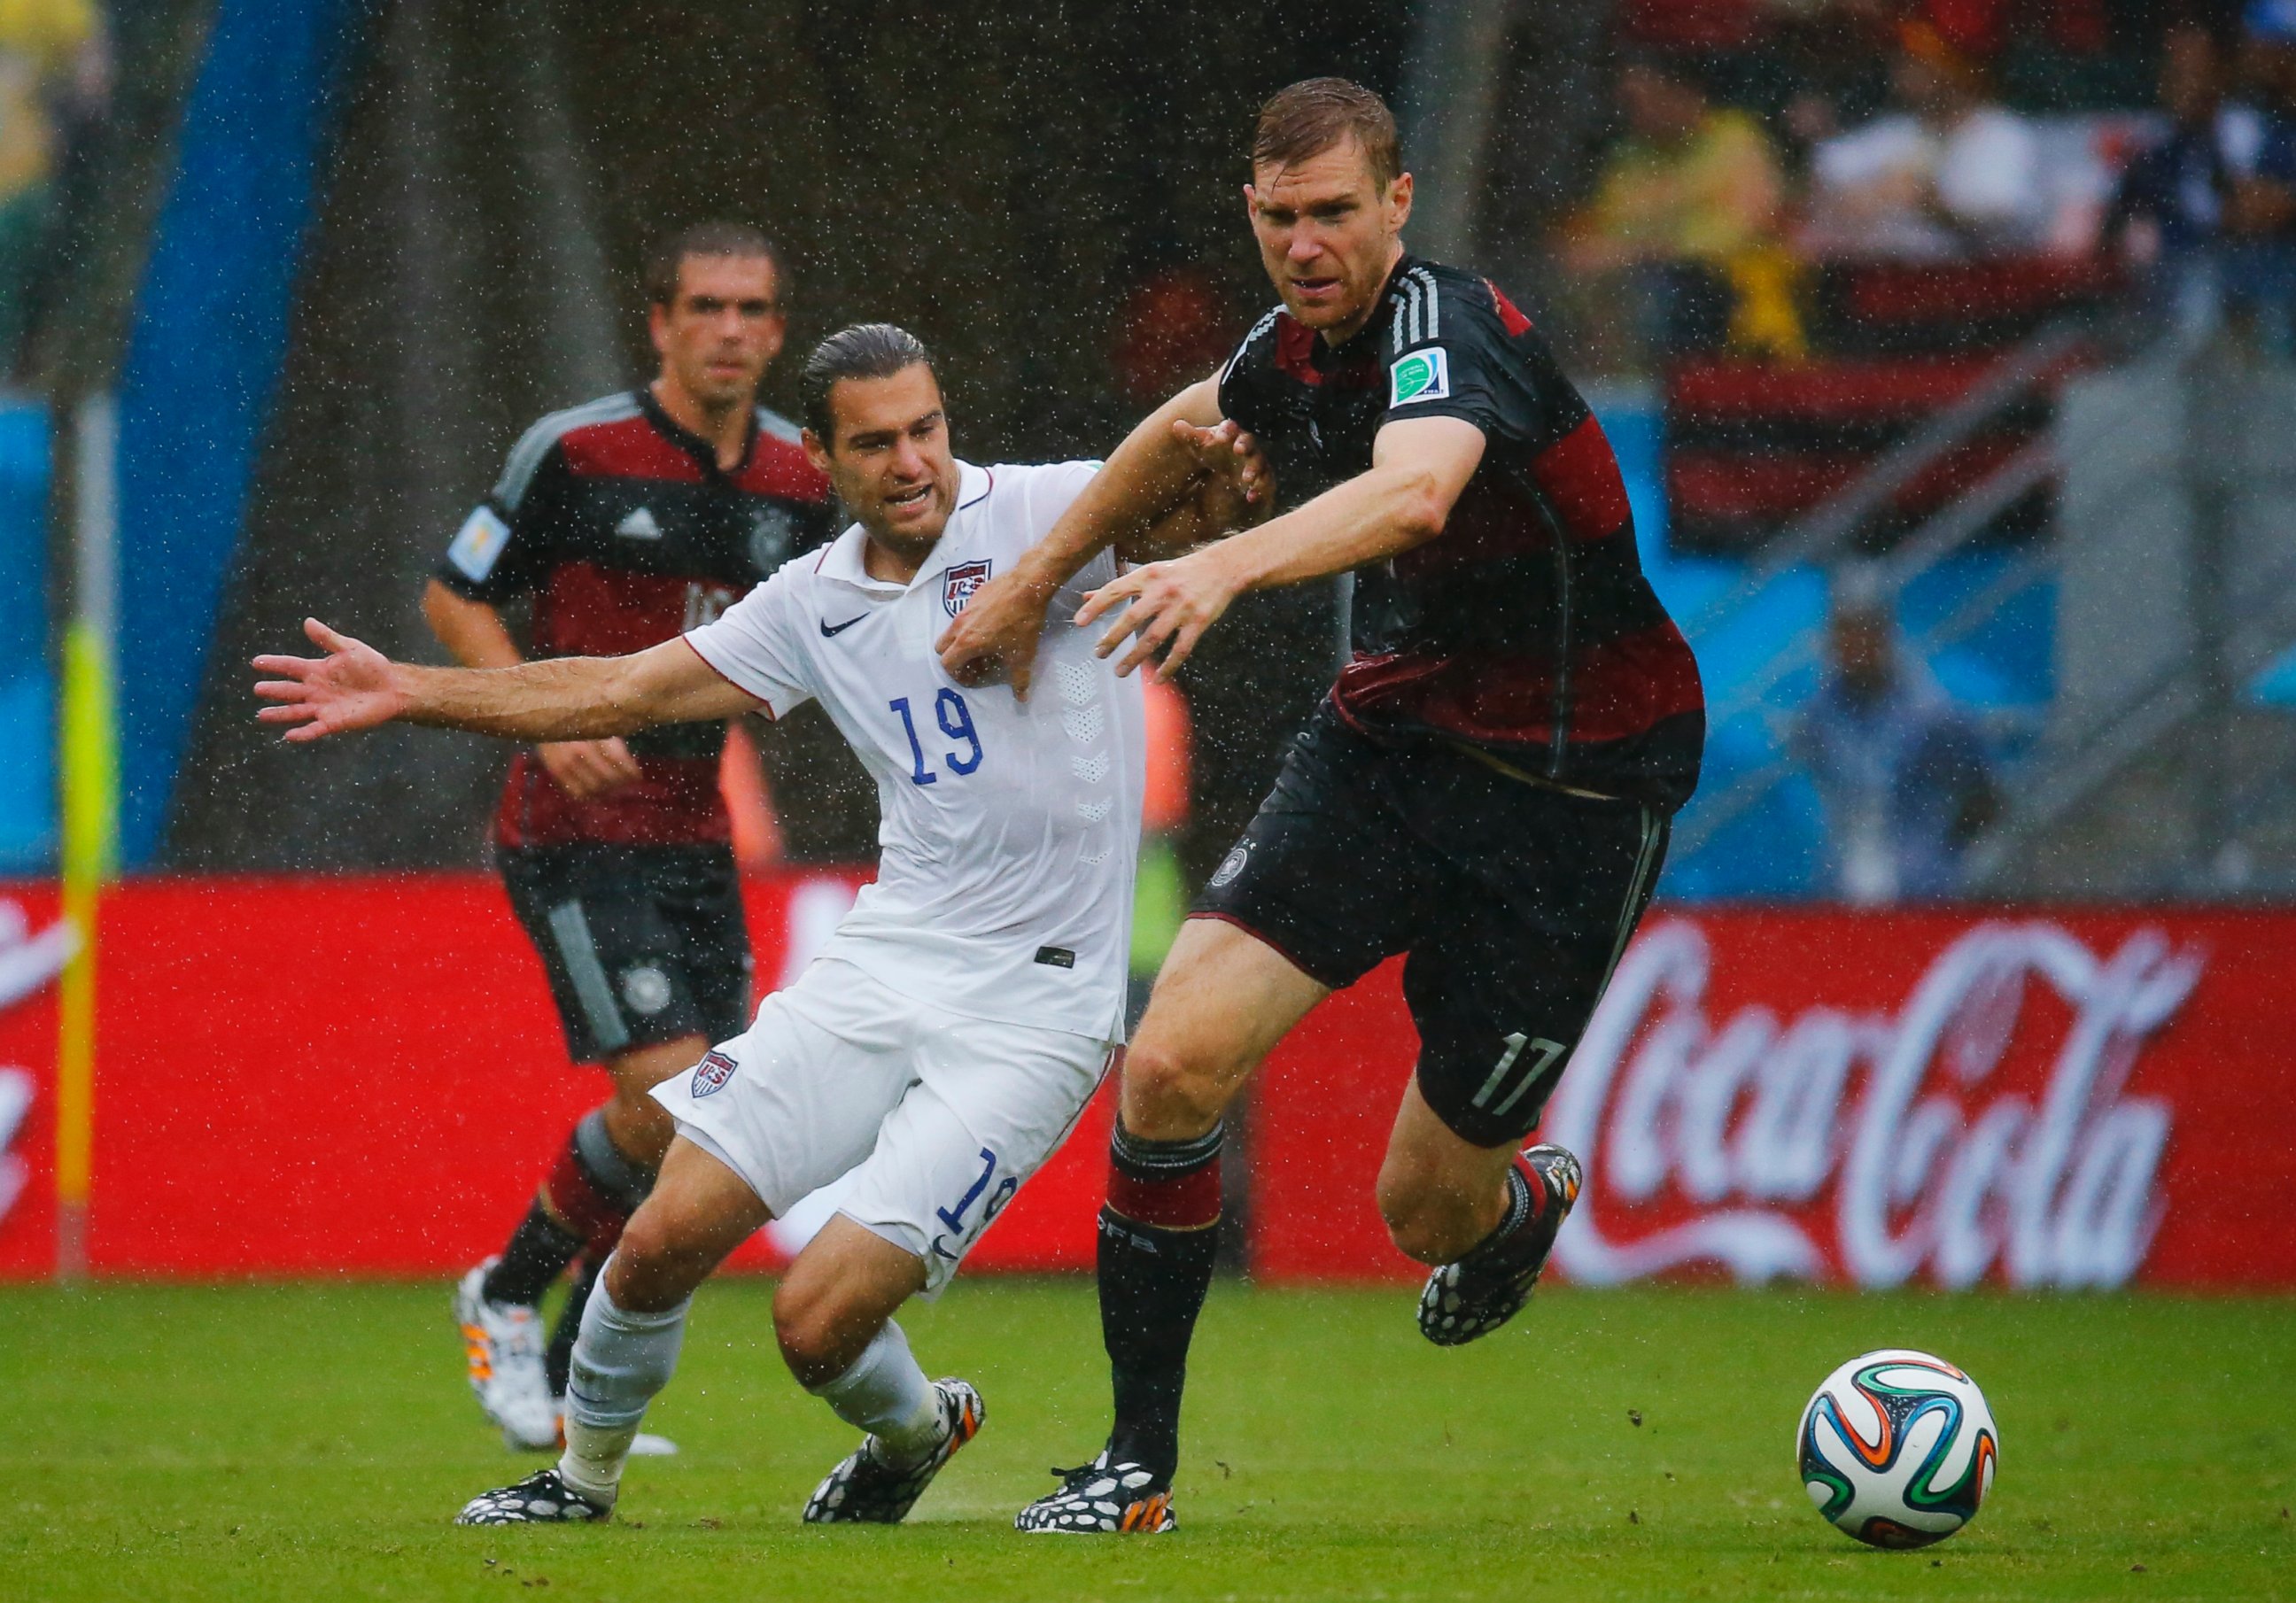 PHOTO: Graham Zusi of the U.S. fights for the ball with Germany's Per Mertesacker during their 2014 World Cup soccer match in Recife on June 26, 2014.